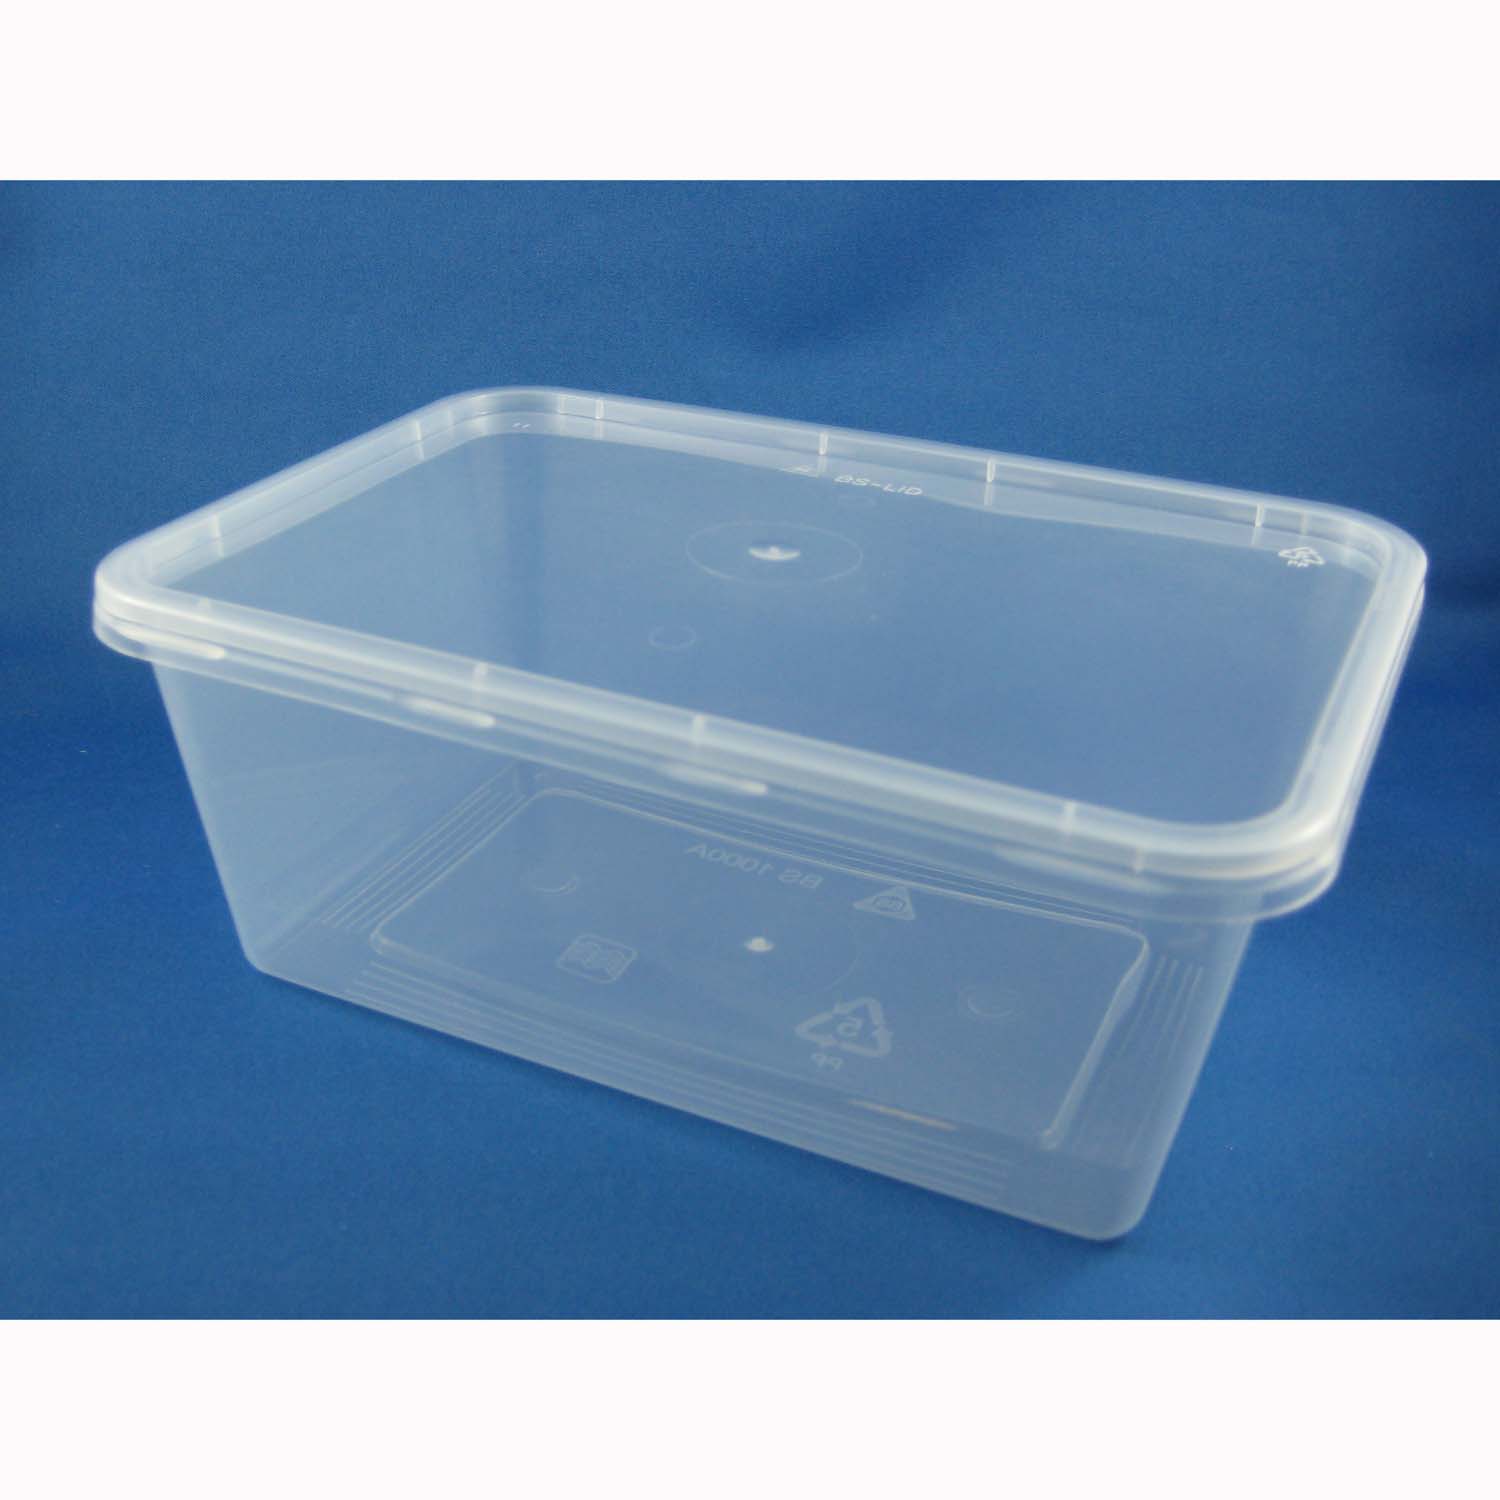 50 x Takeaway Food Containers With Lids Size 1000ml Rectangular Containers 